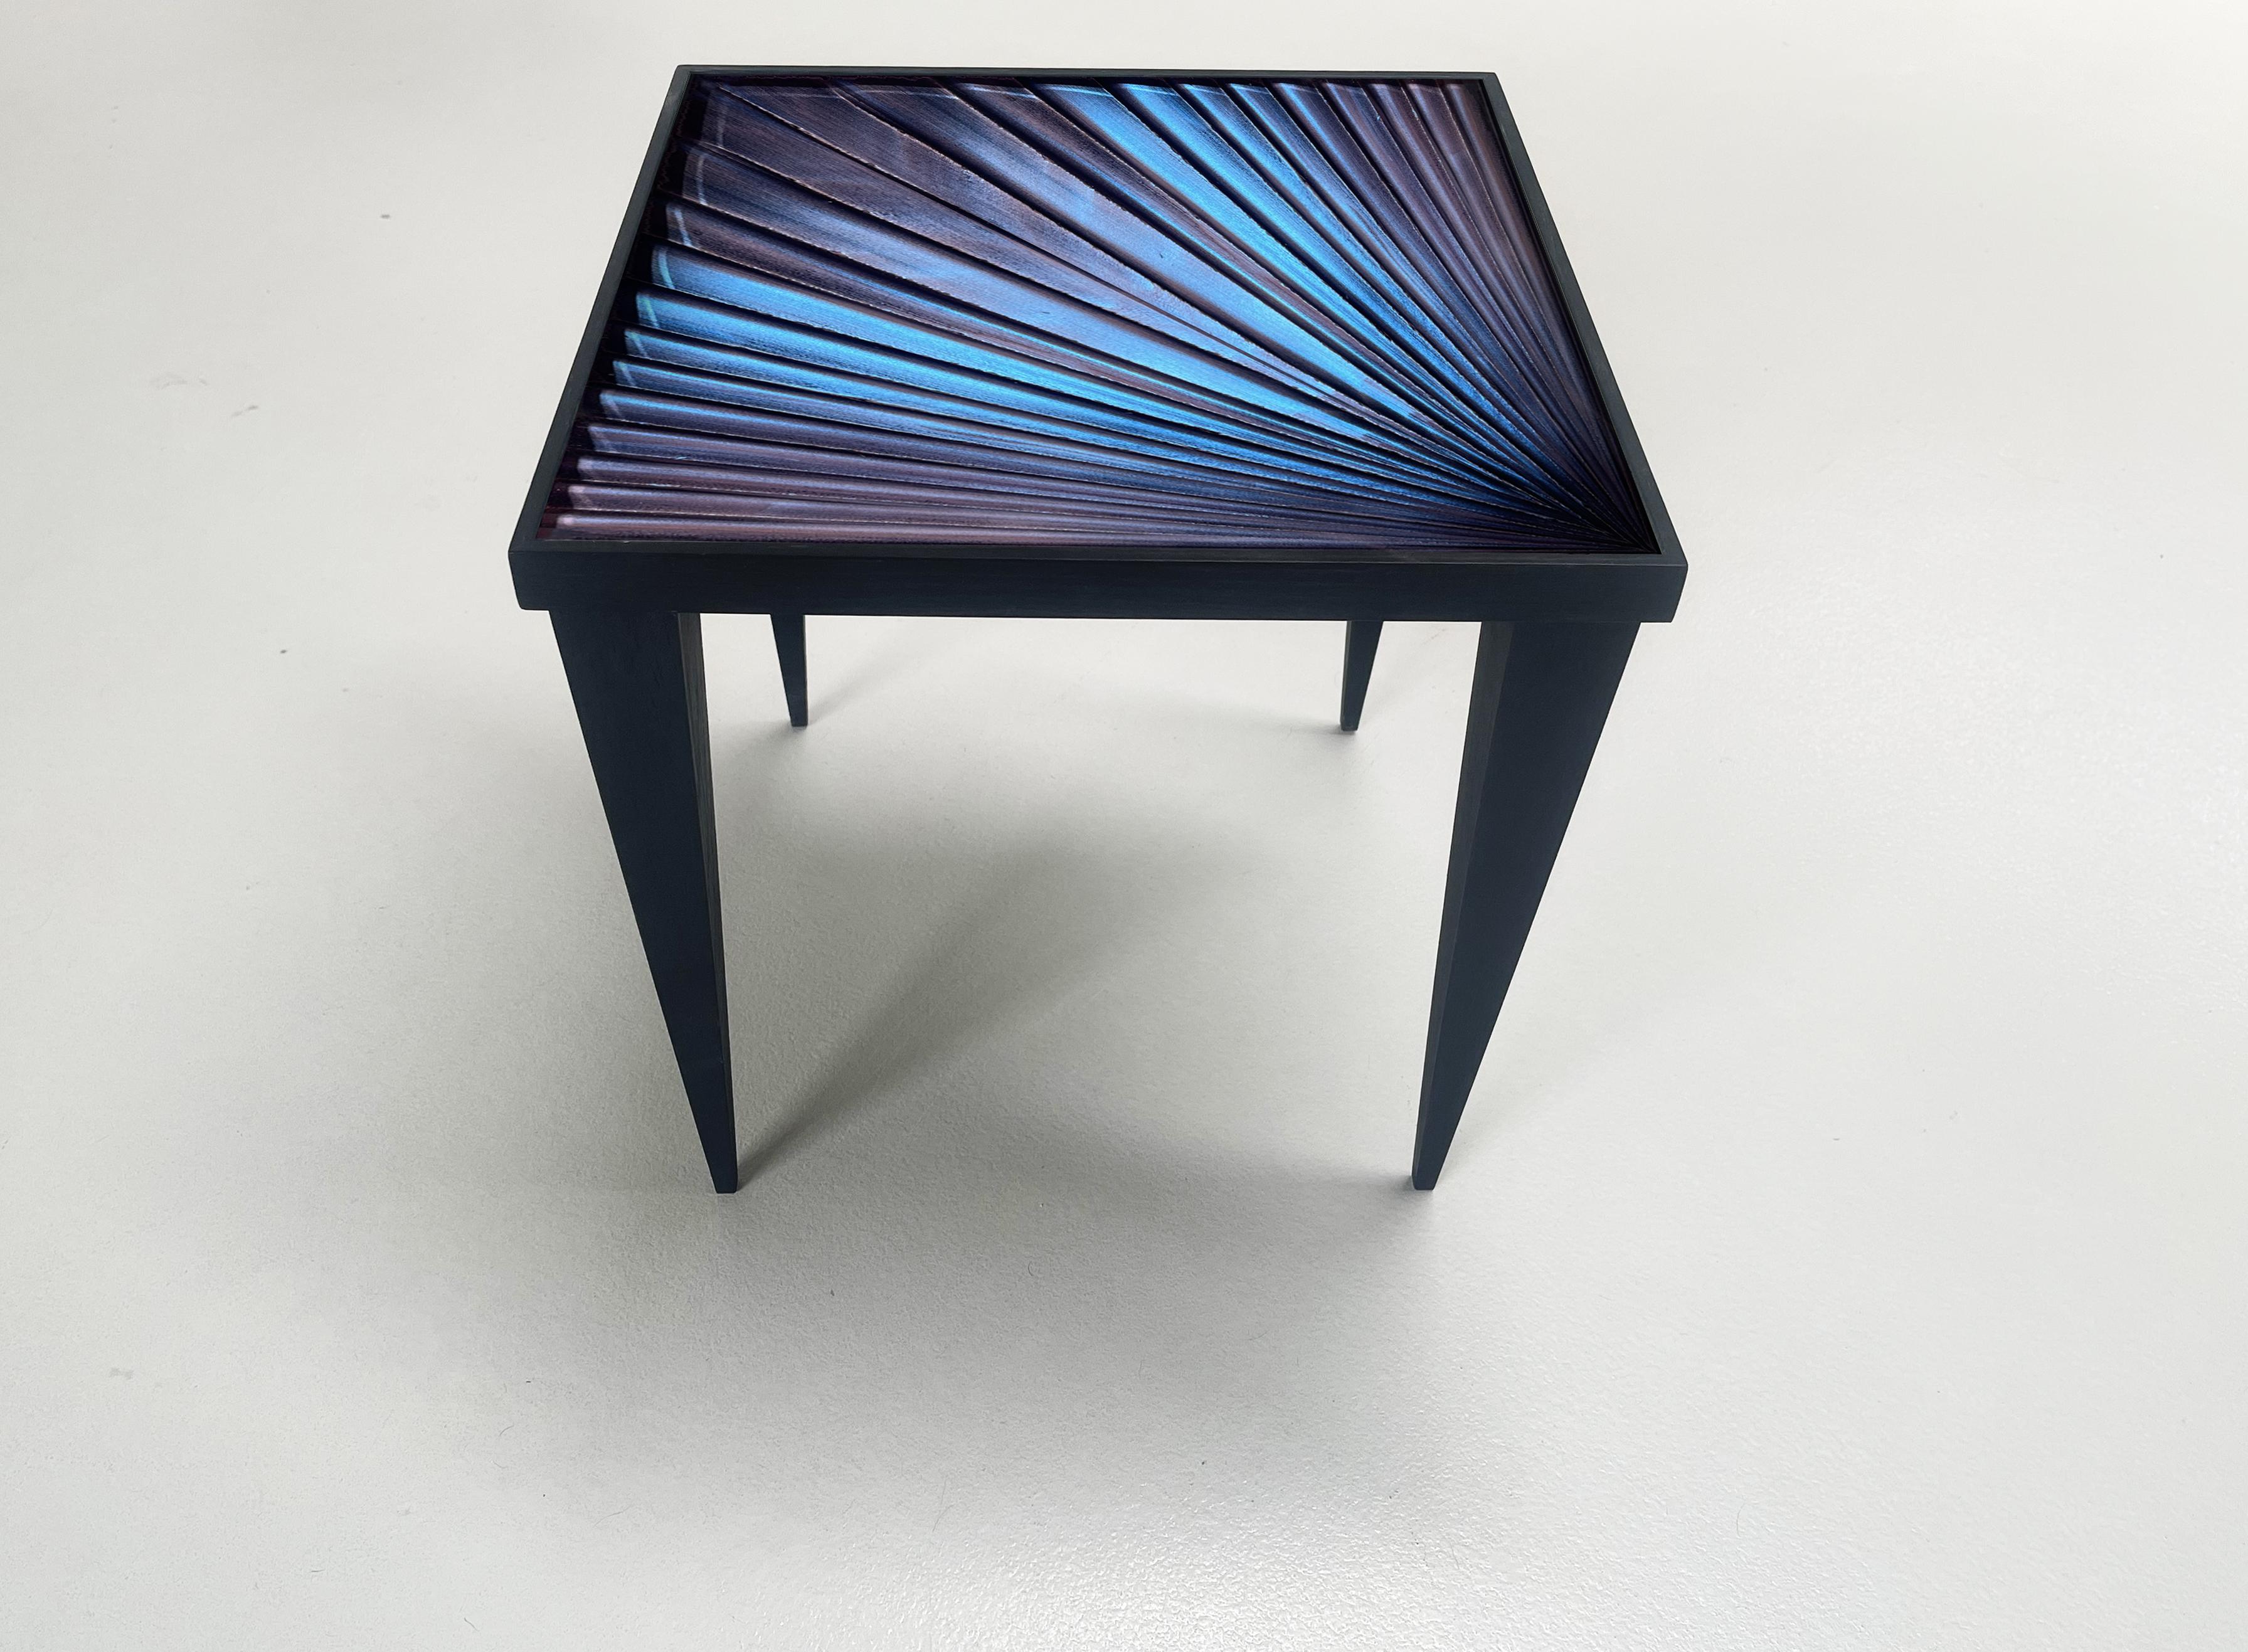 
The ‘Square’ table is innovative and contemporary. 
The support structure is made with oak wood with matt black finish.
The crystal top is hand-engraved at the bottom. The finish of the crystal is blue with pink and purple reflections.
The crystal